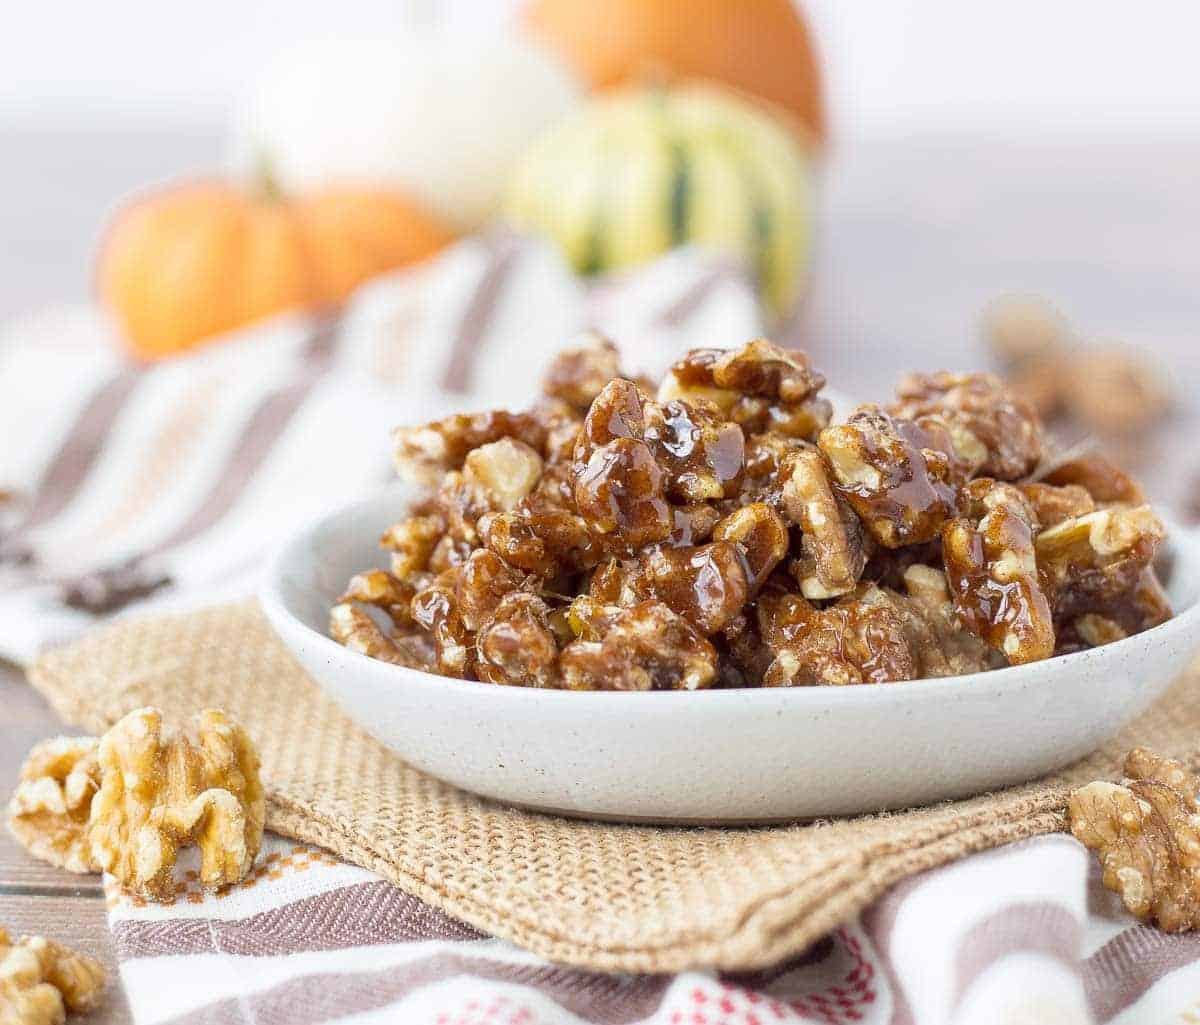 A bowl of pumpkin spice candied walnuts on a table with orange pumpkins in the background.